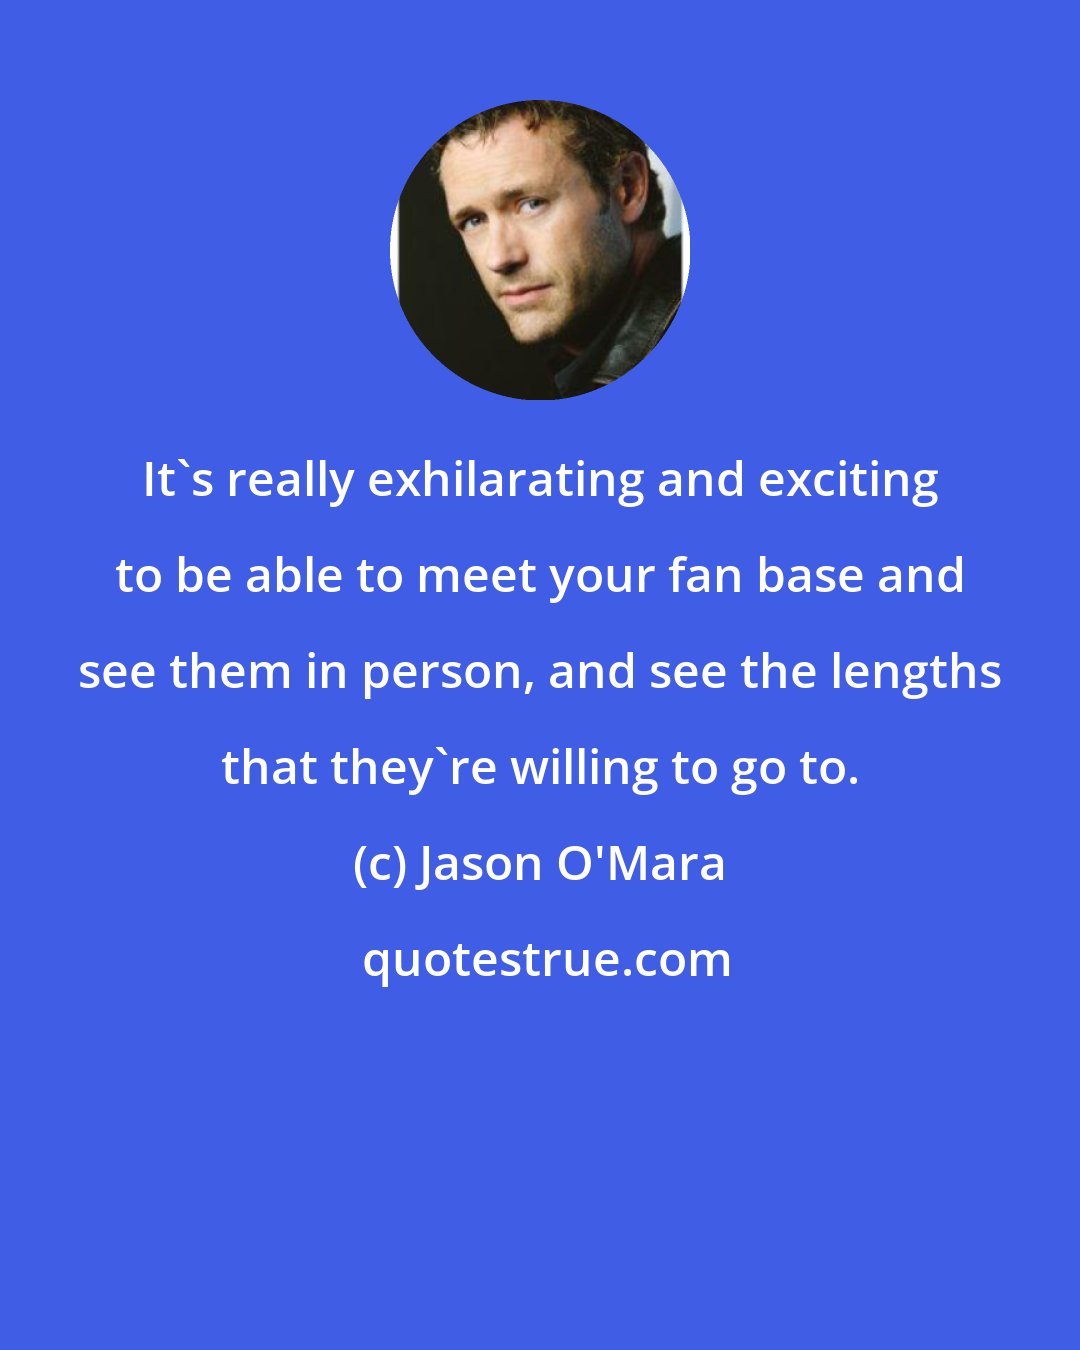 Jason O'Mara: It's really exhilarating and exciting to be able to meet your fan base and see them in person, and see the lengths that they're willing to go to.